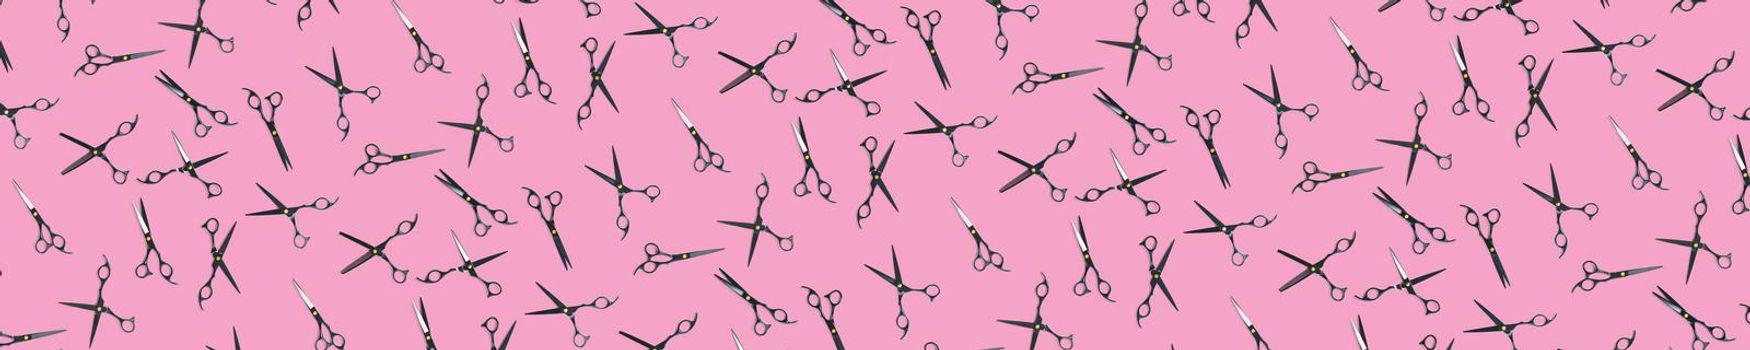 Background of black scissors. professional hairdresser black scissors isolated on pink. Black barber scissors, close up. pop art background, for prints or posters. not seamless pattern